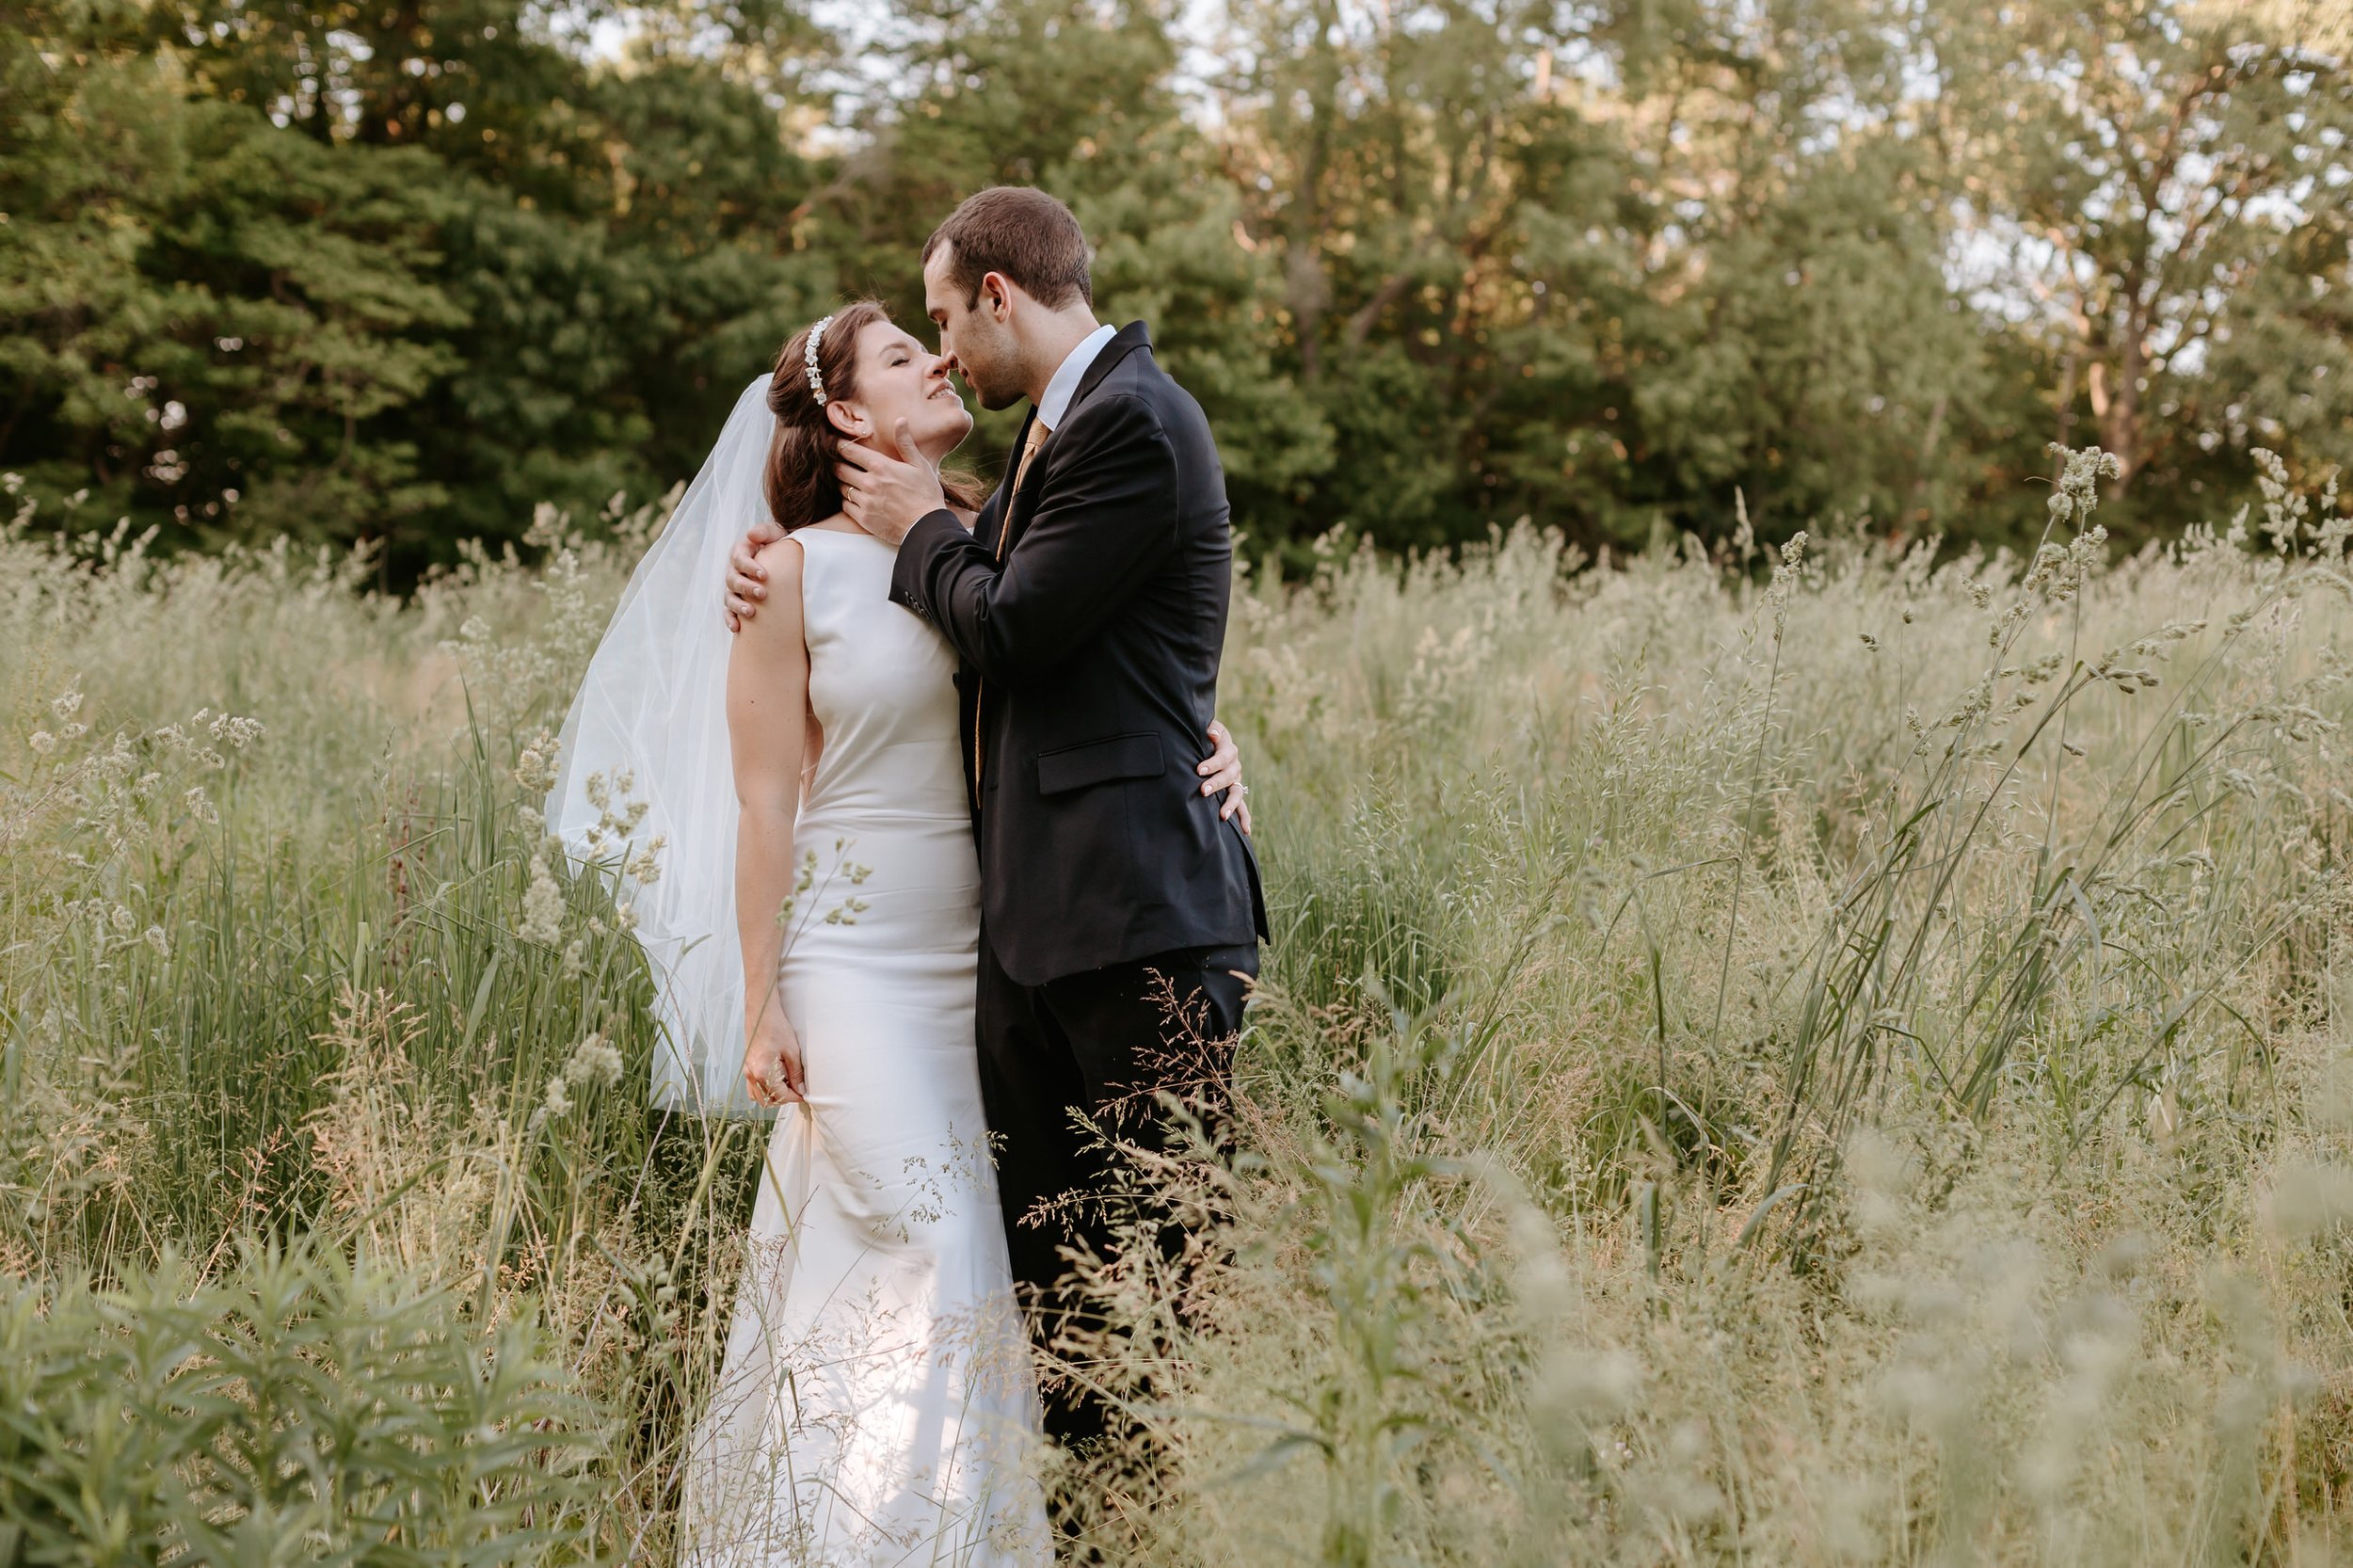 A bride and groom kissing in a field of tall grass.